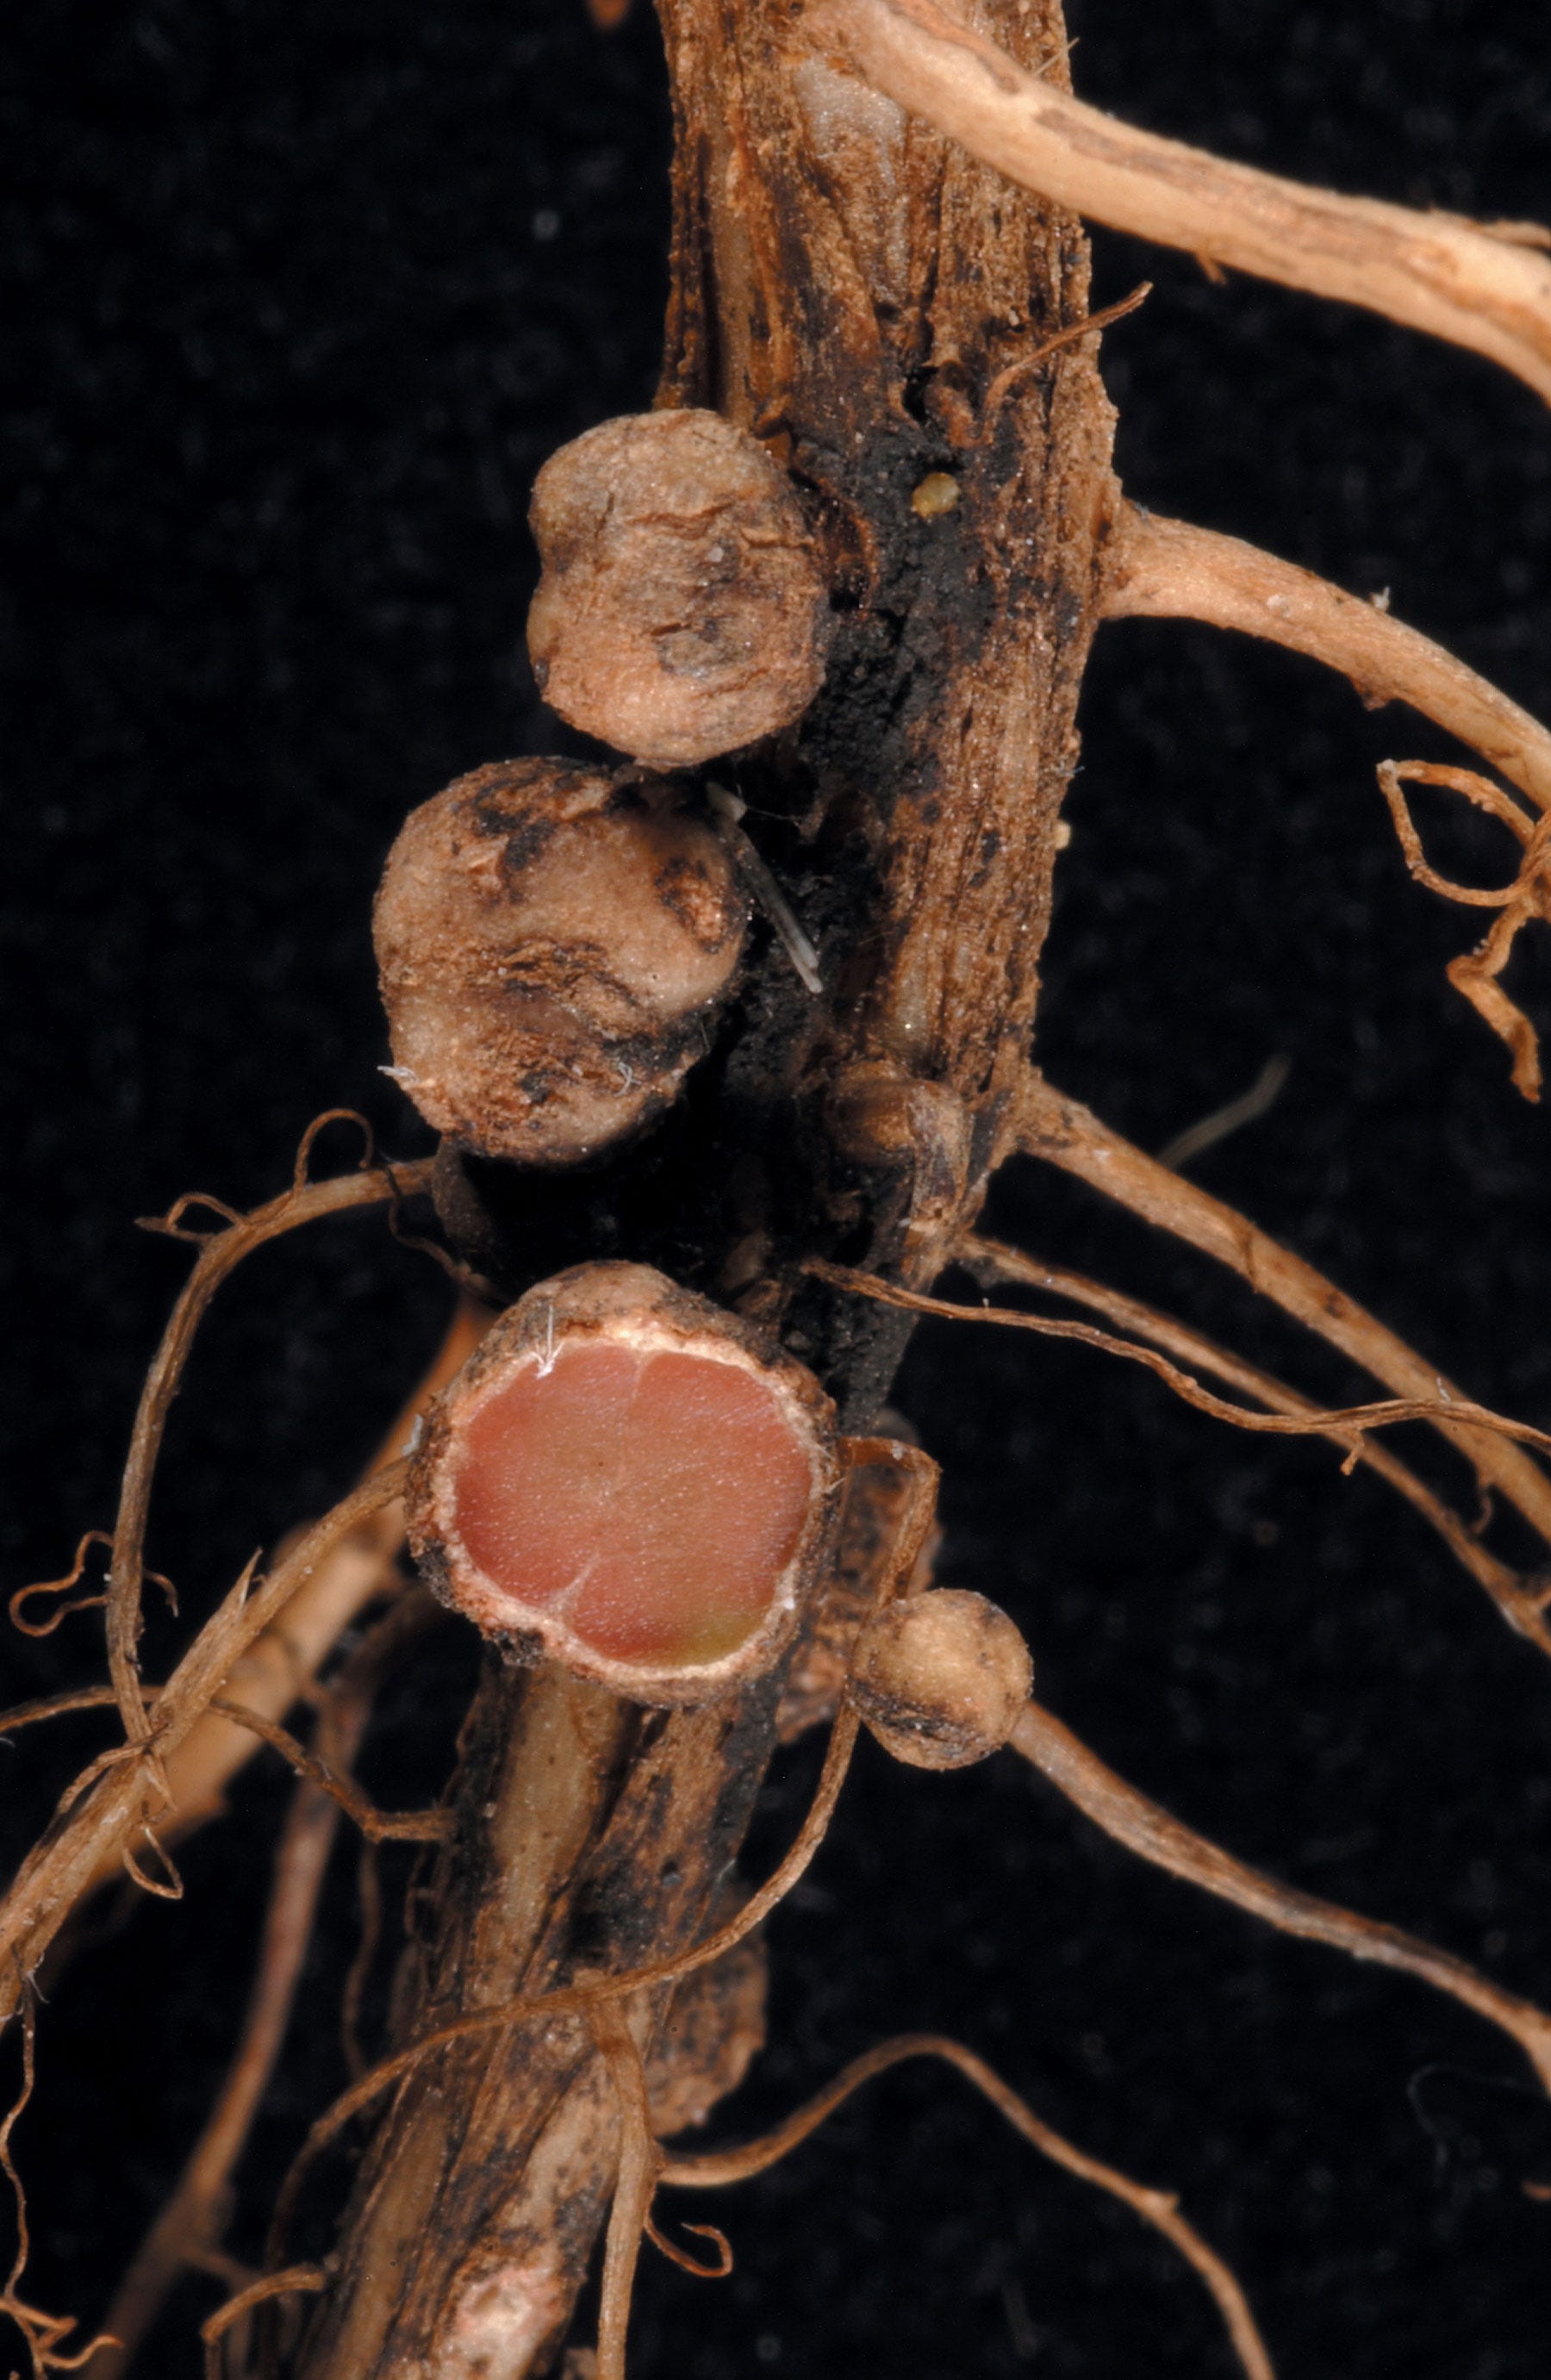 A close-up of nodules on a soybean plant, with one cut open